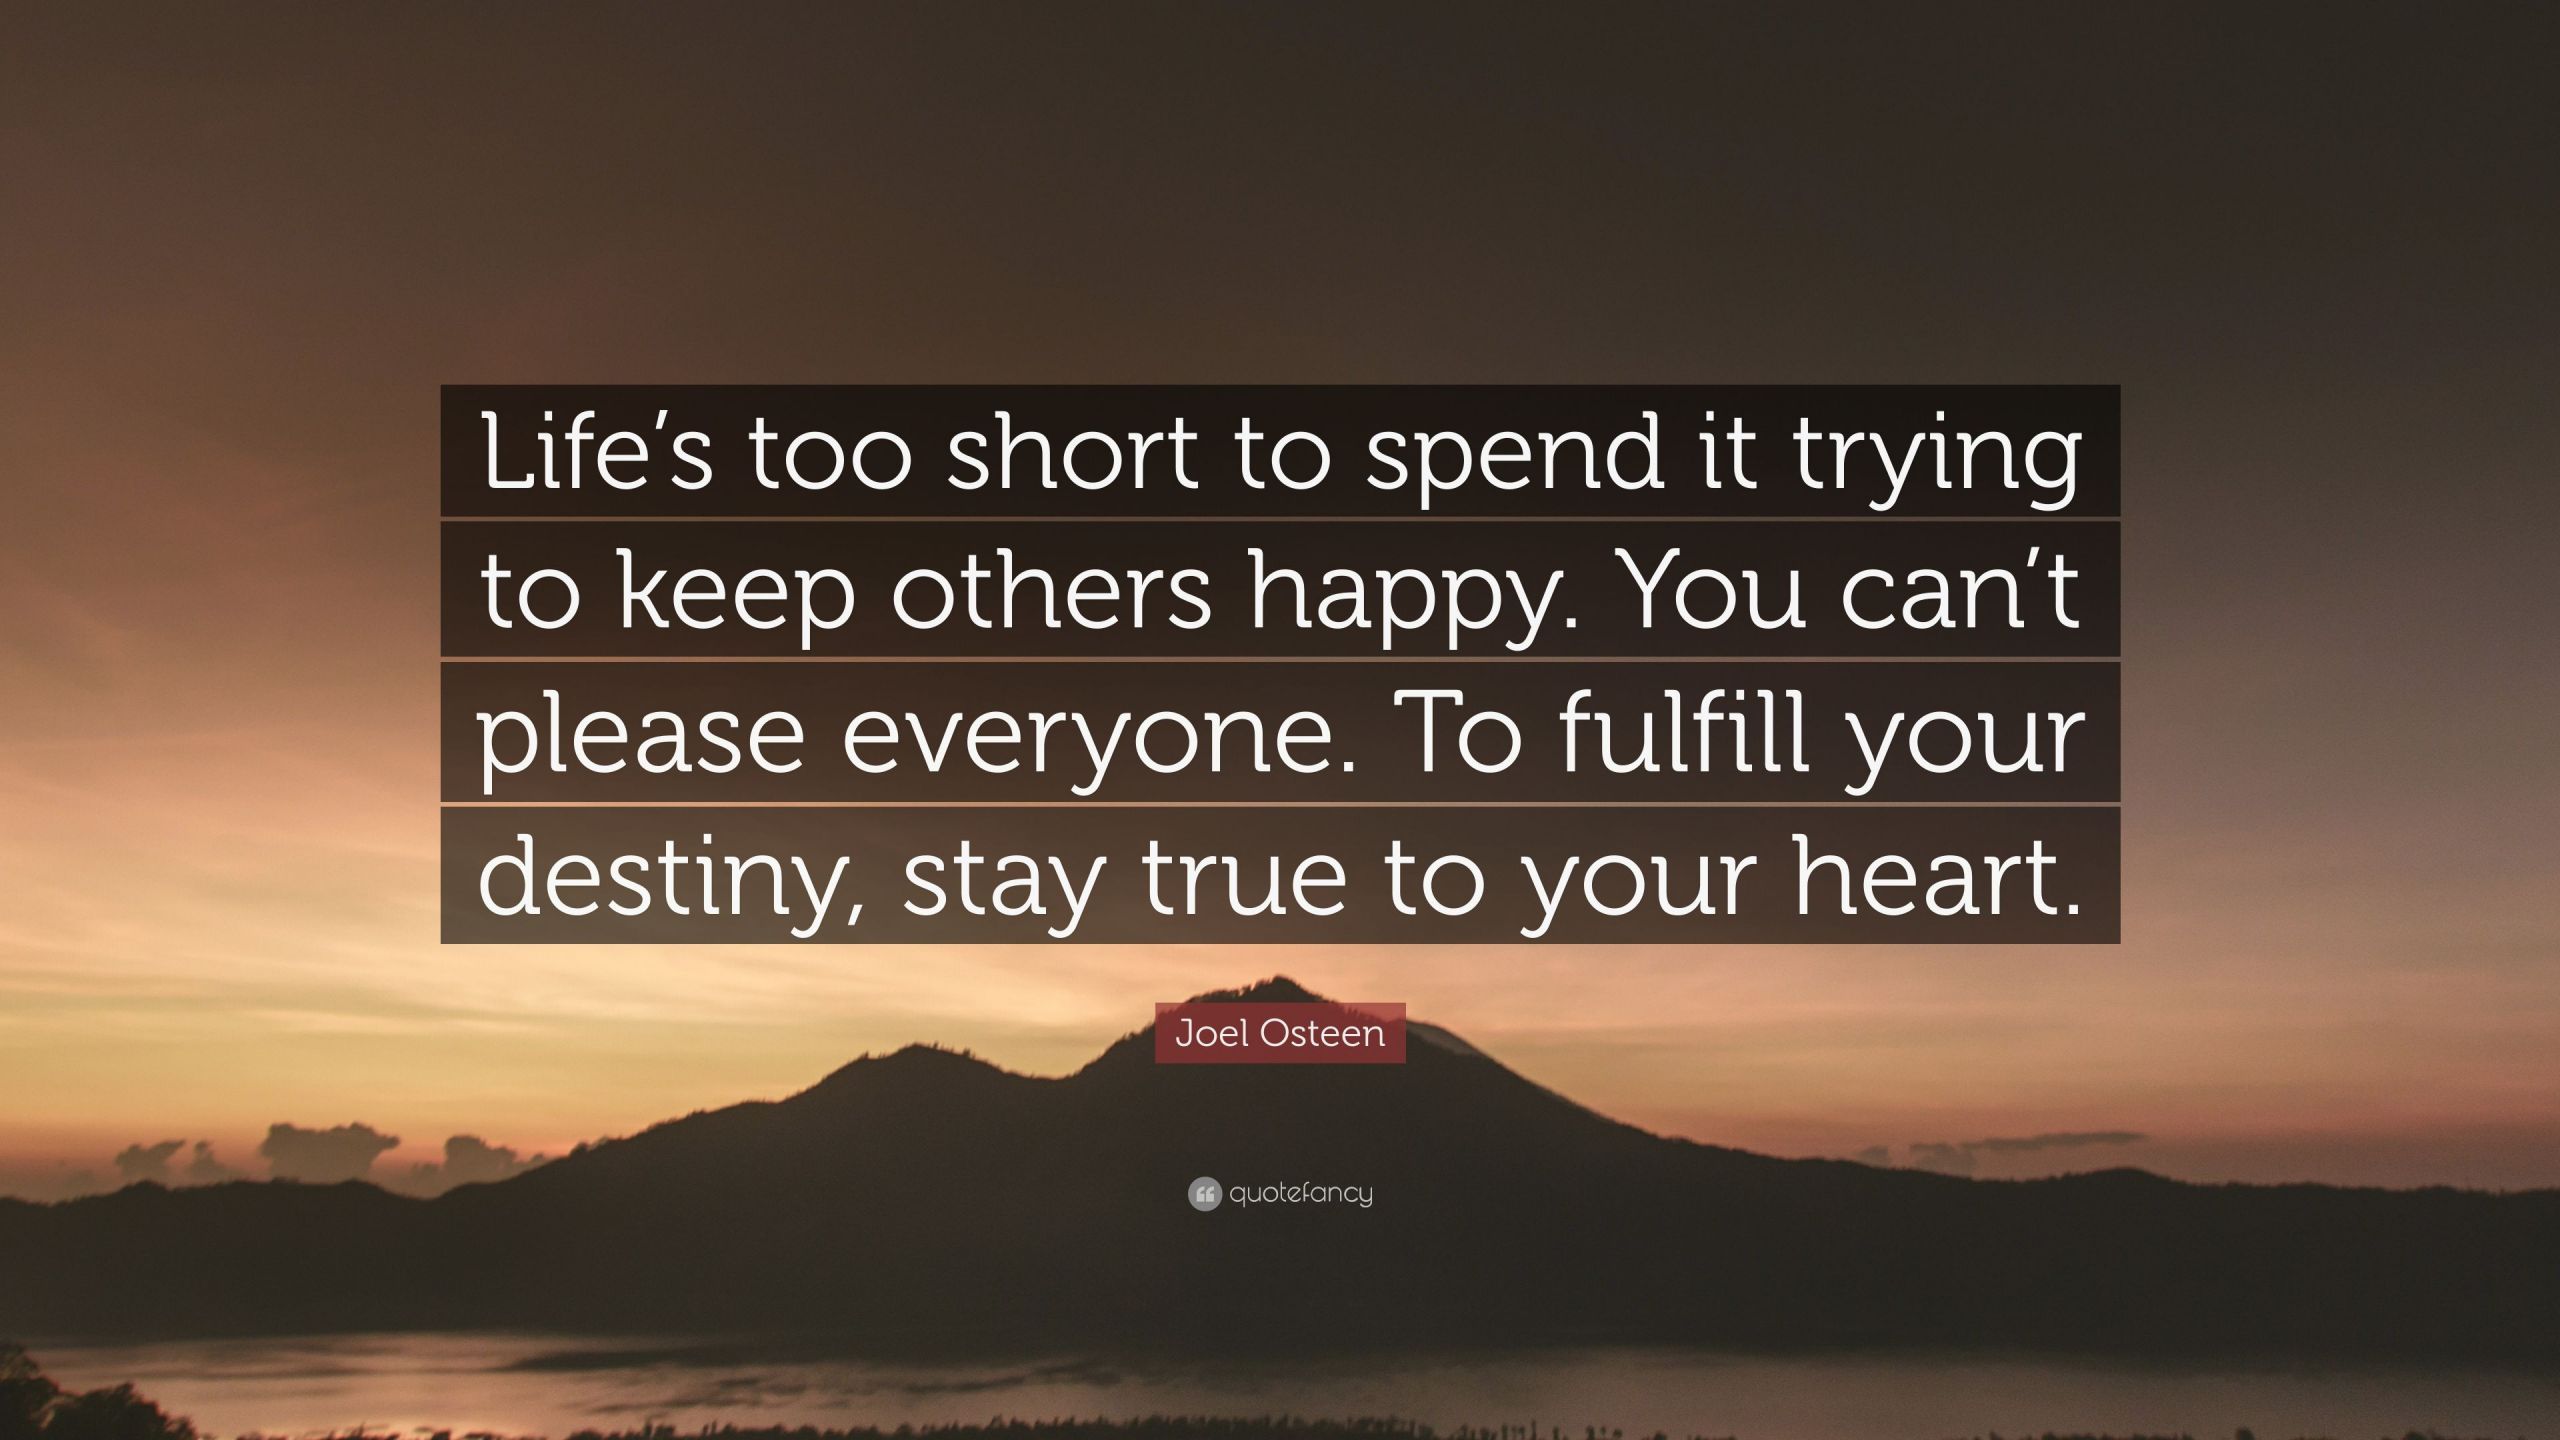 Joel Osteen Quotes About Life
 Joel Osteen Quote “Life’s too short to spend it trying to